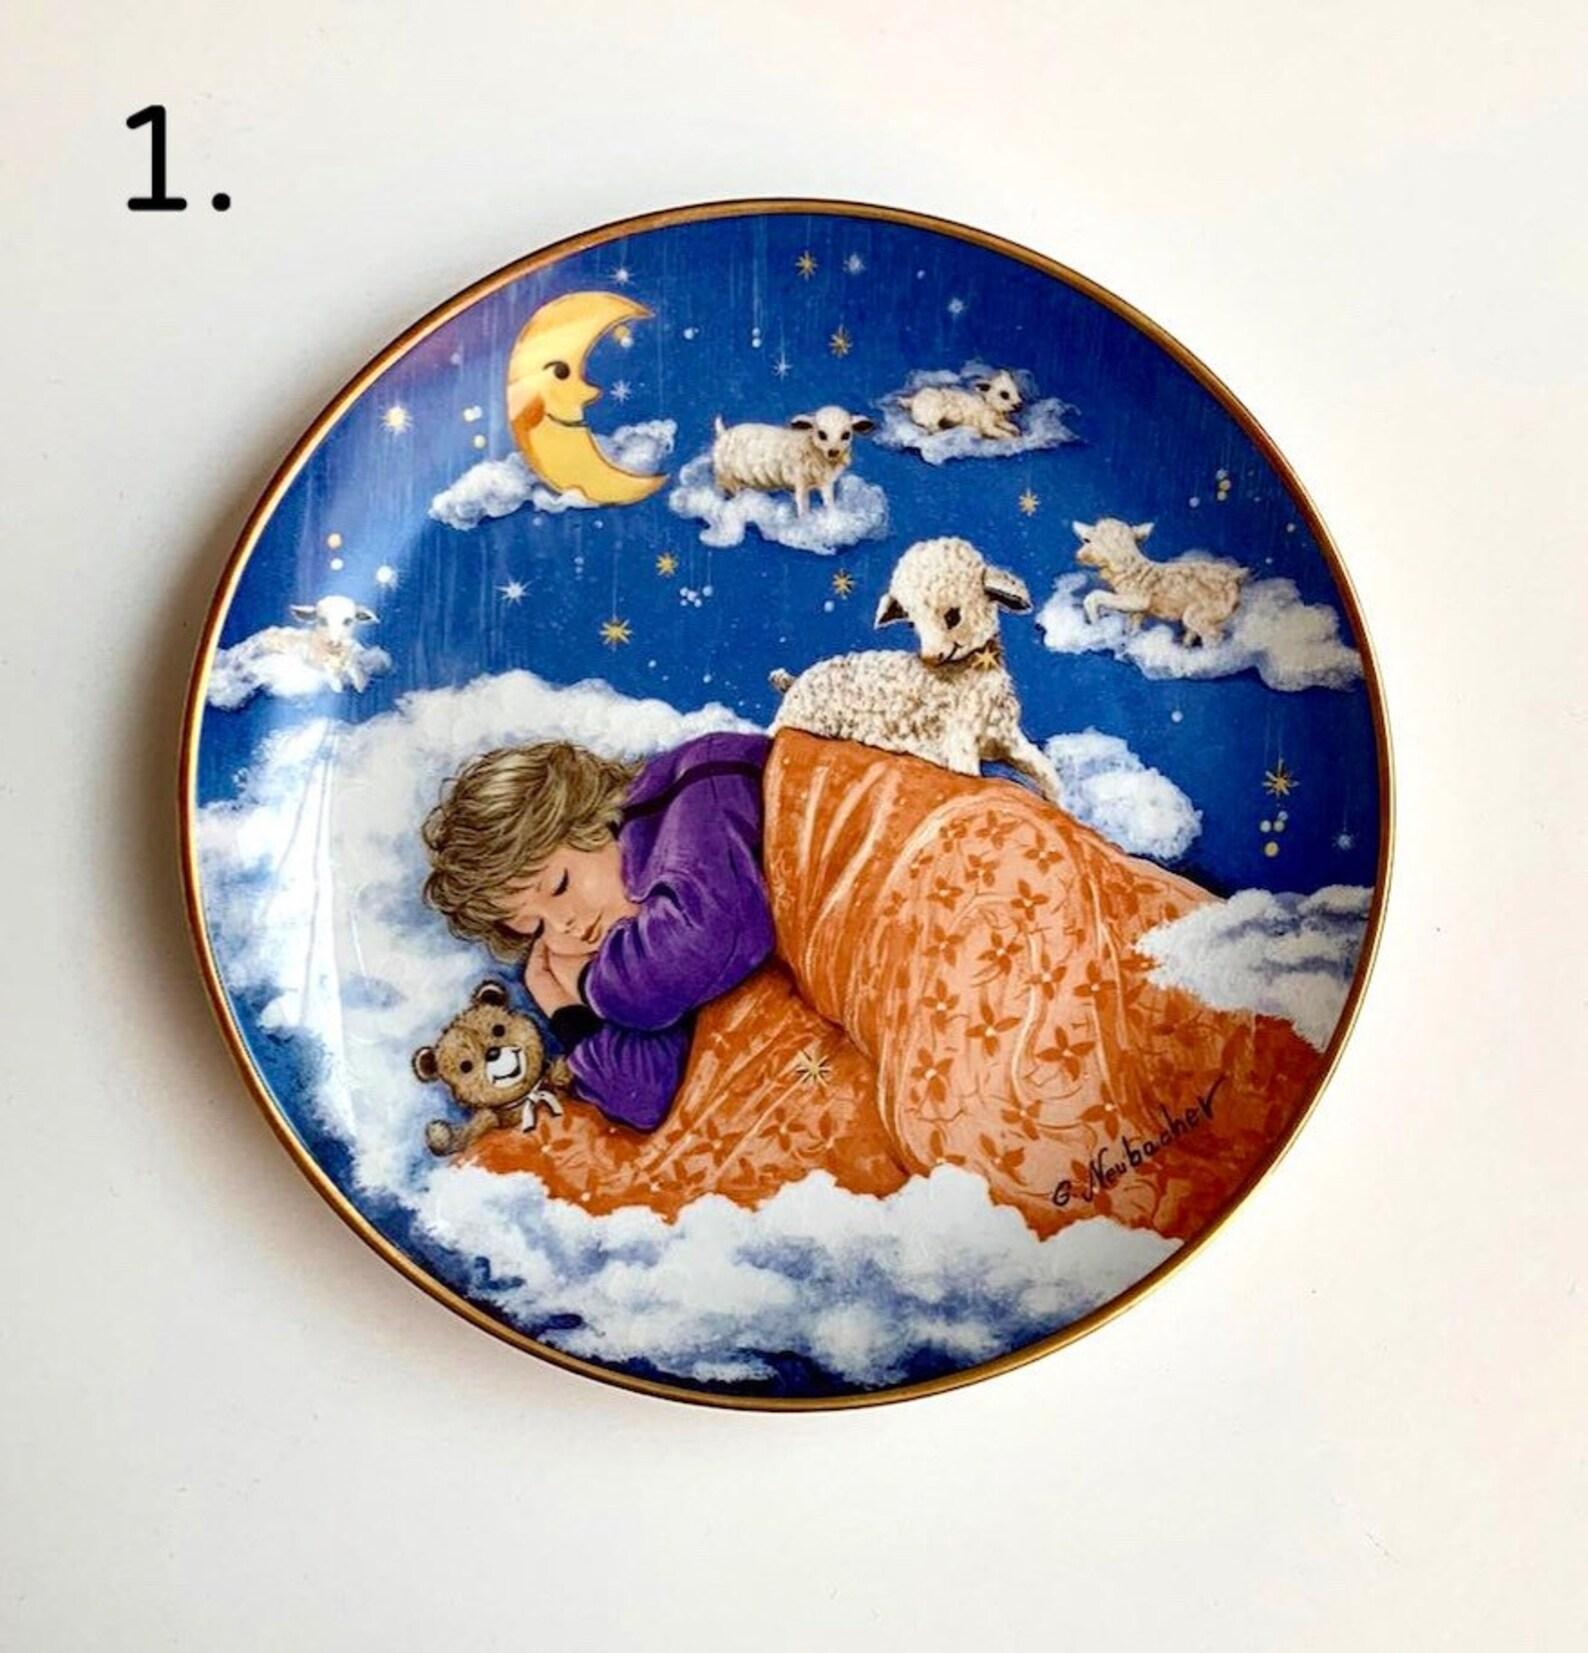 Decorative collection plates from the finest bone china from the famous German manufactory Kaiser (Kaiser). 

Series “Classical lullabies of the world.” 

Plates were created by German artist Gerda Neubacher and released in 1985-1986. 

There